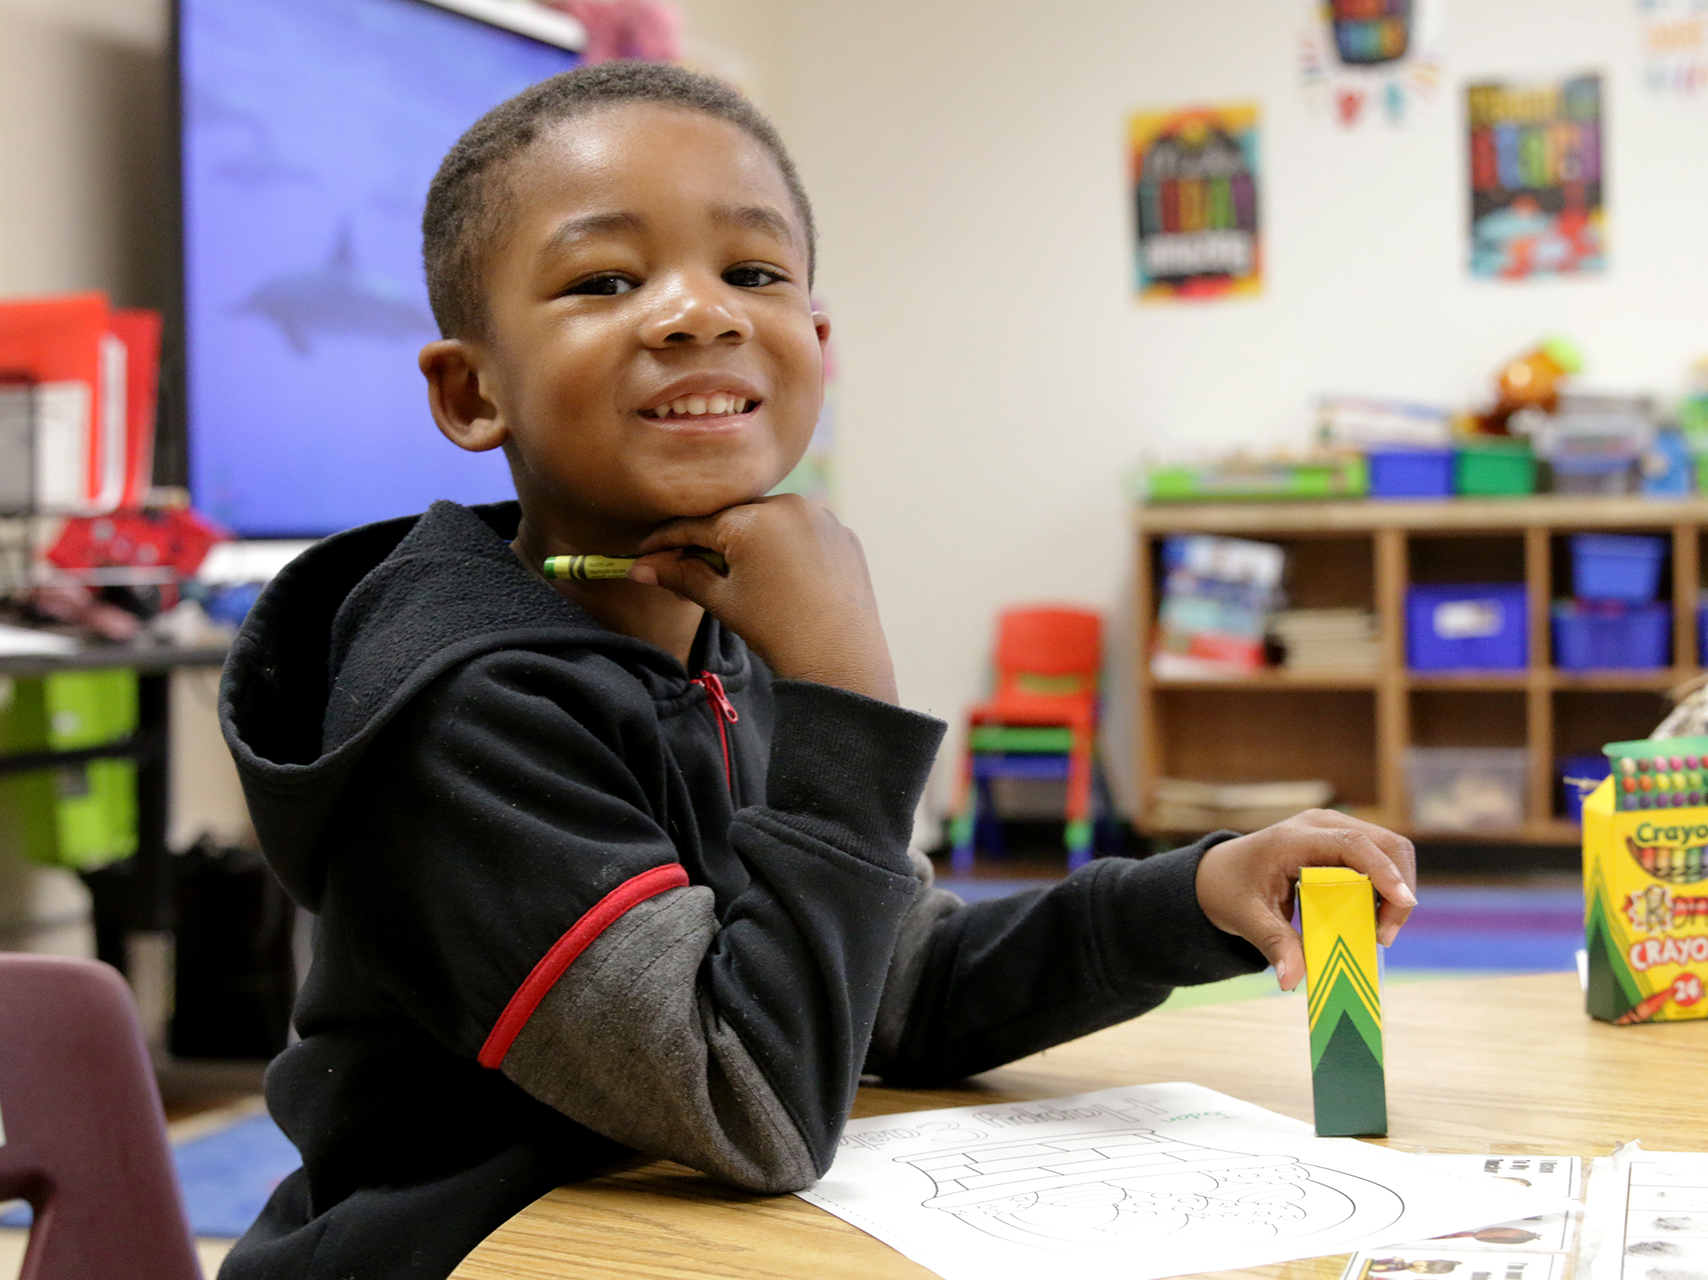 young male student smiling at the camera holding a crayon while working in class